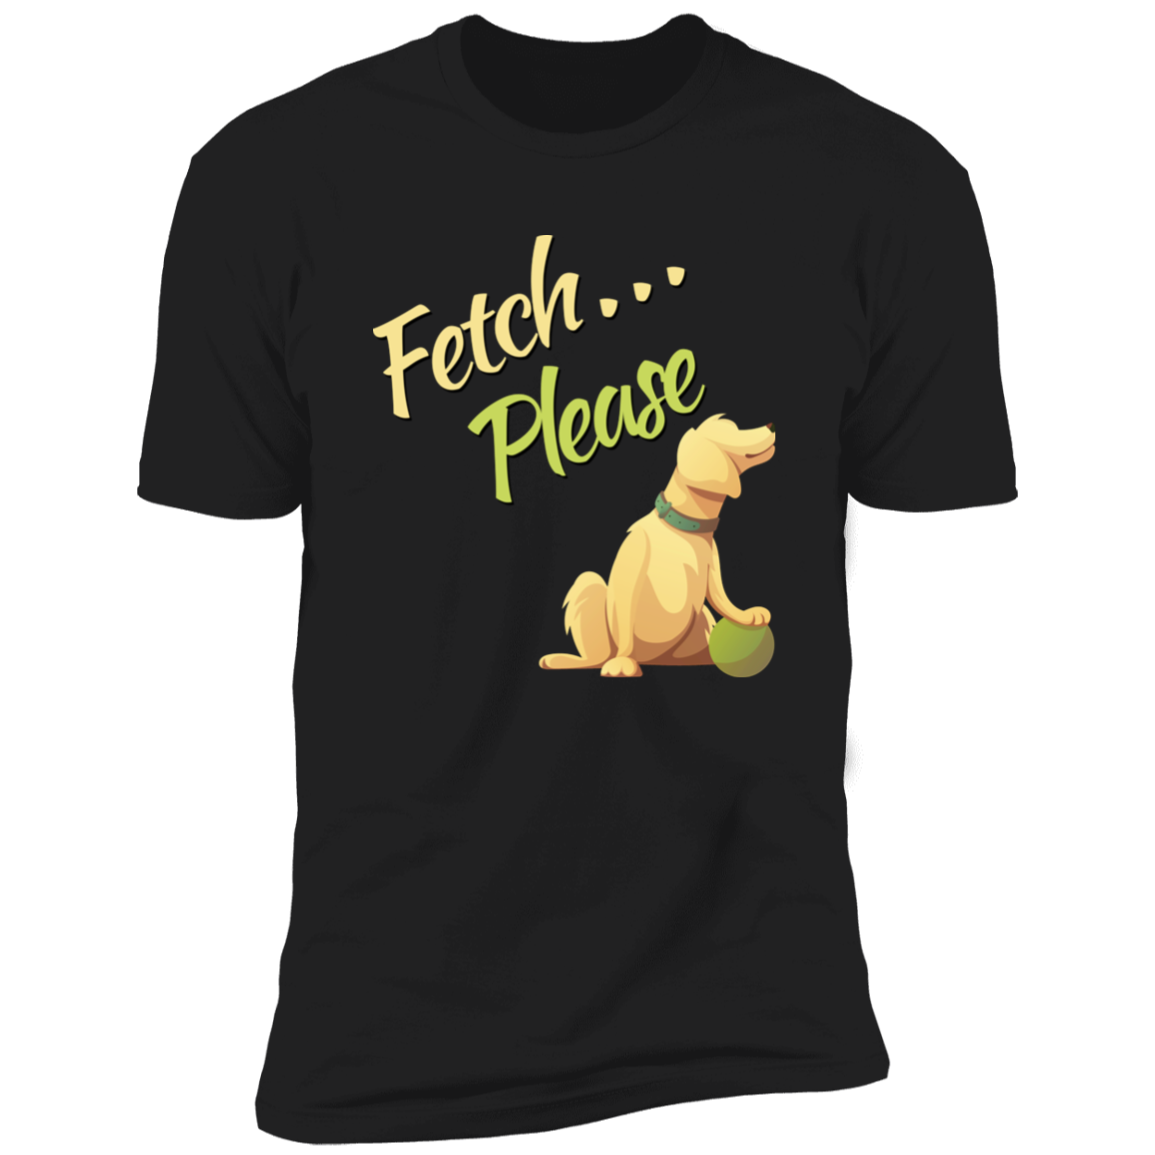 Fetch Please funny dog t-shirt, funny dog shirt for humans, in black